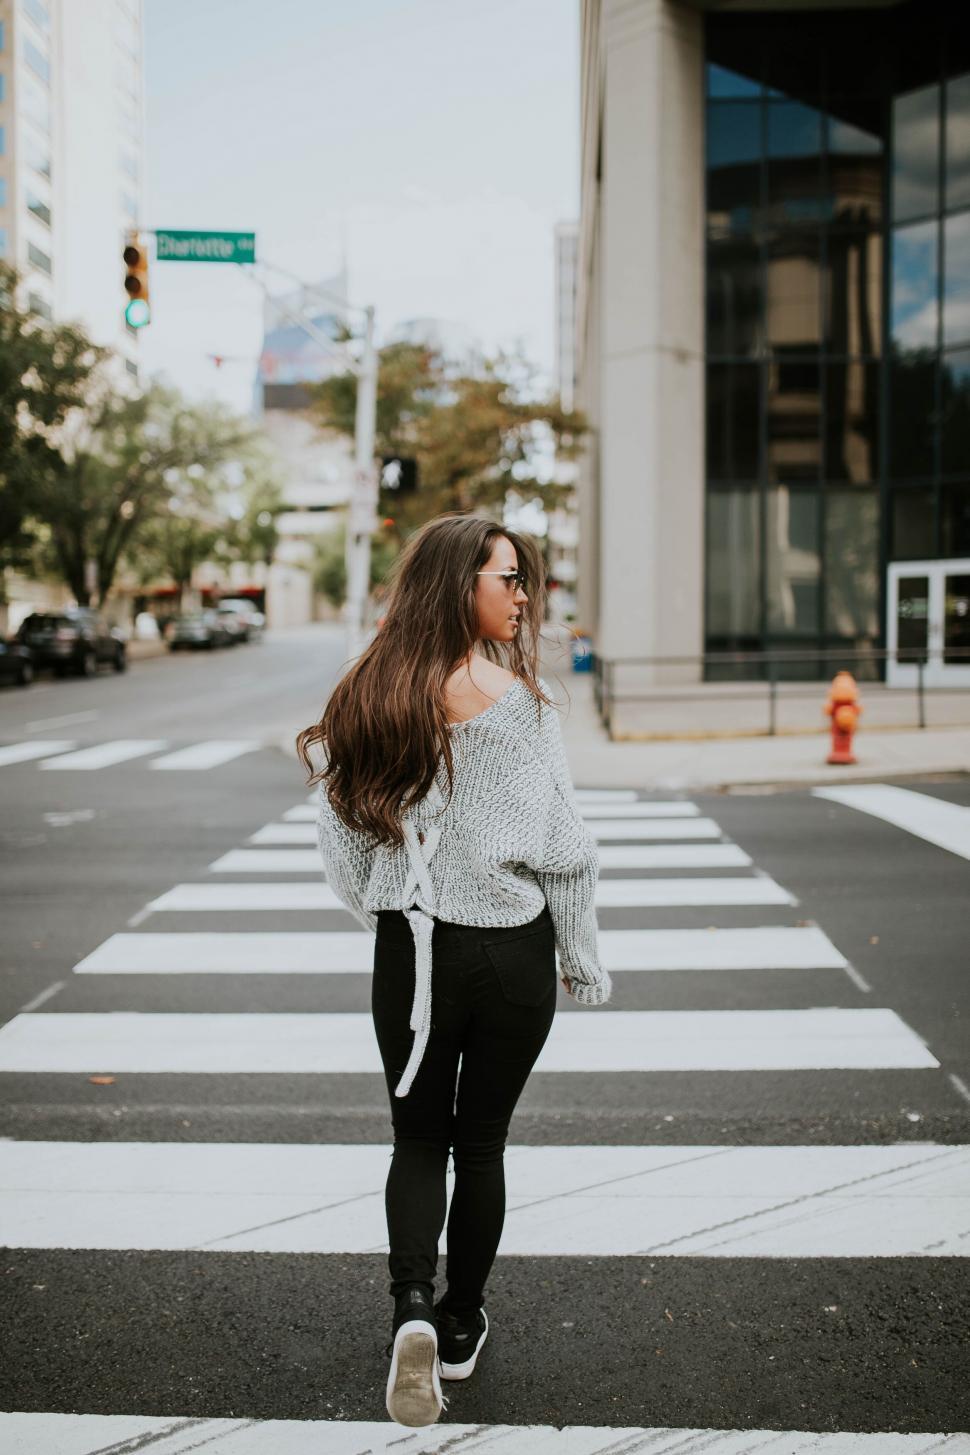 Free Image of Young woman crossing the street in city 